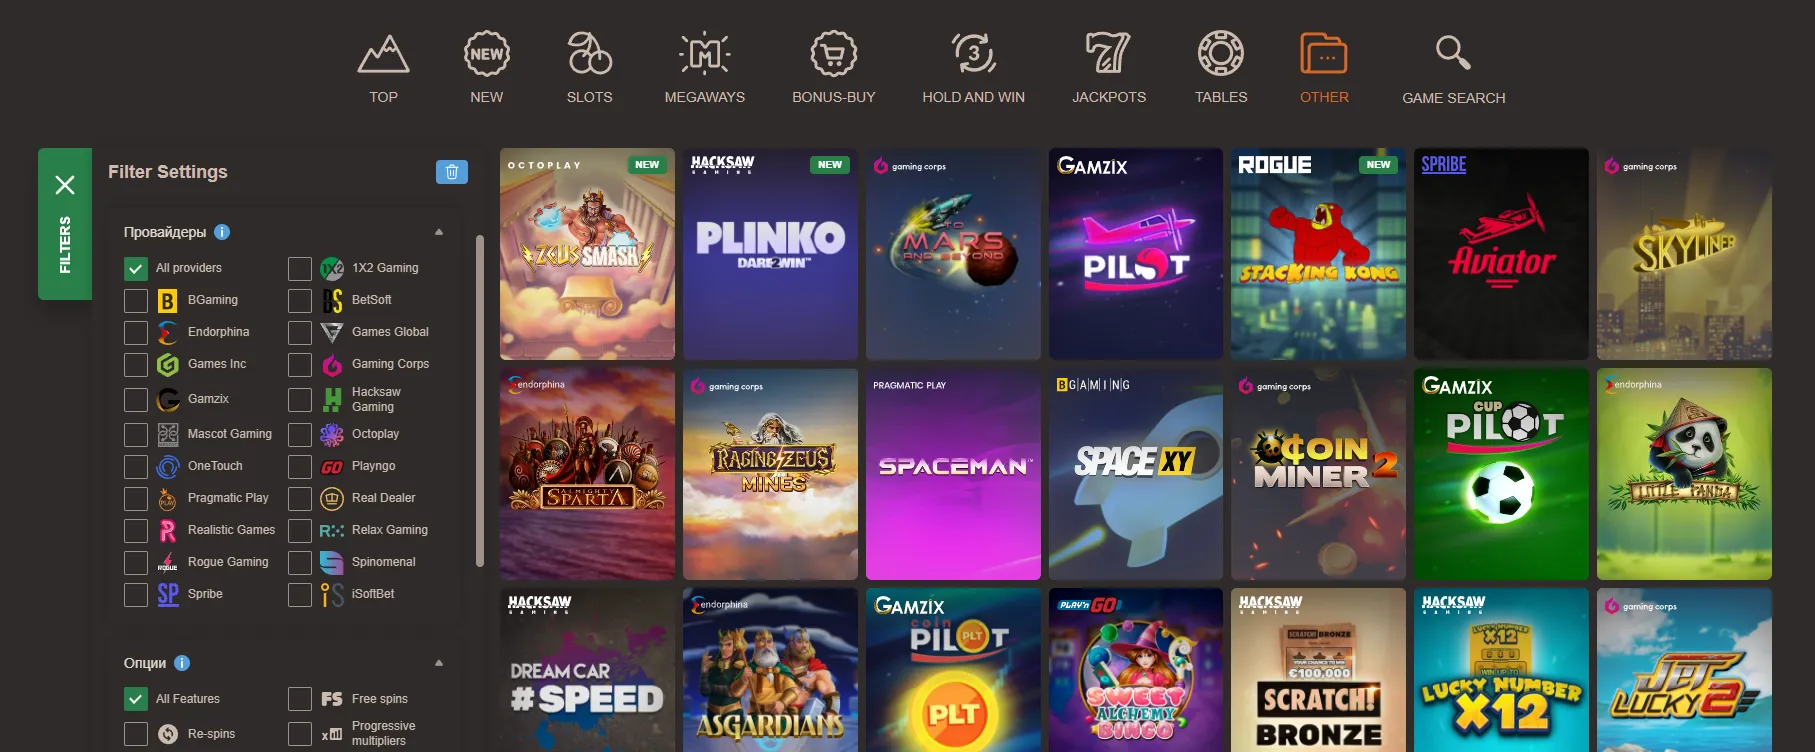 Selection of Games and Providers